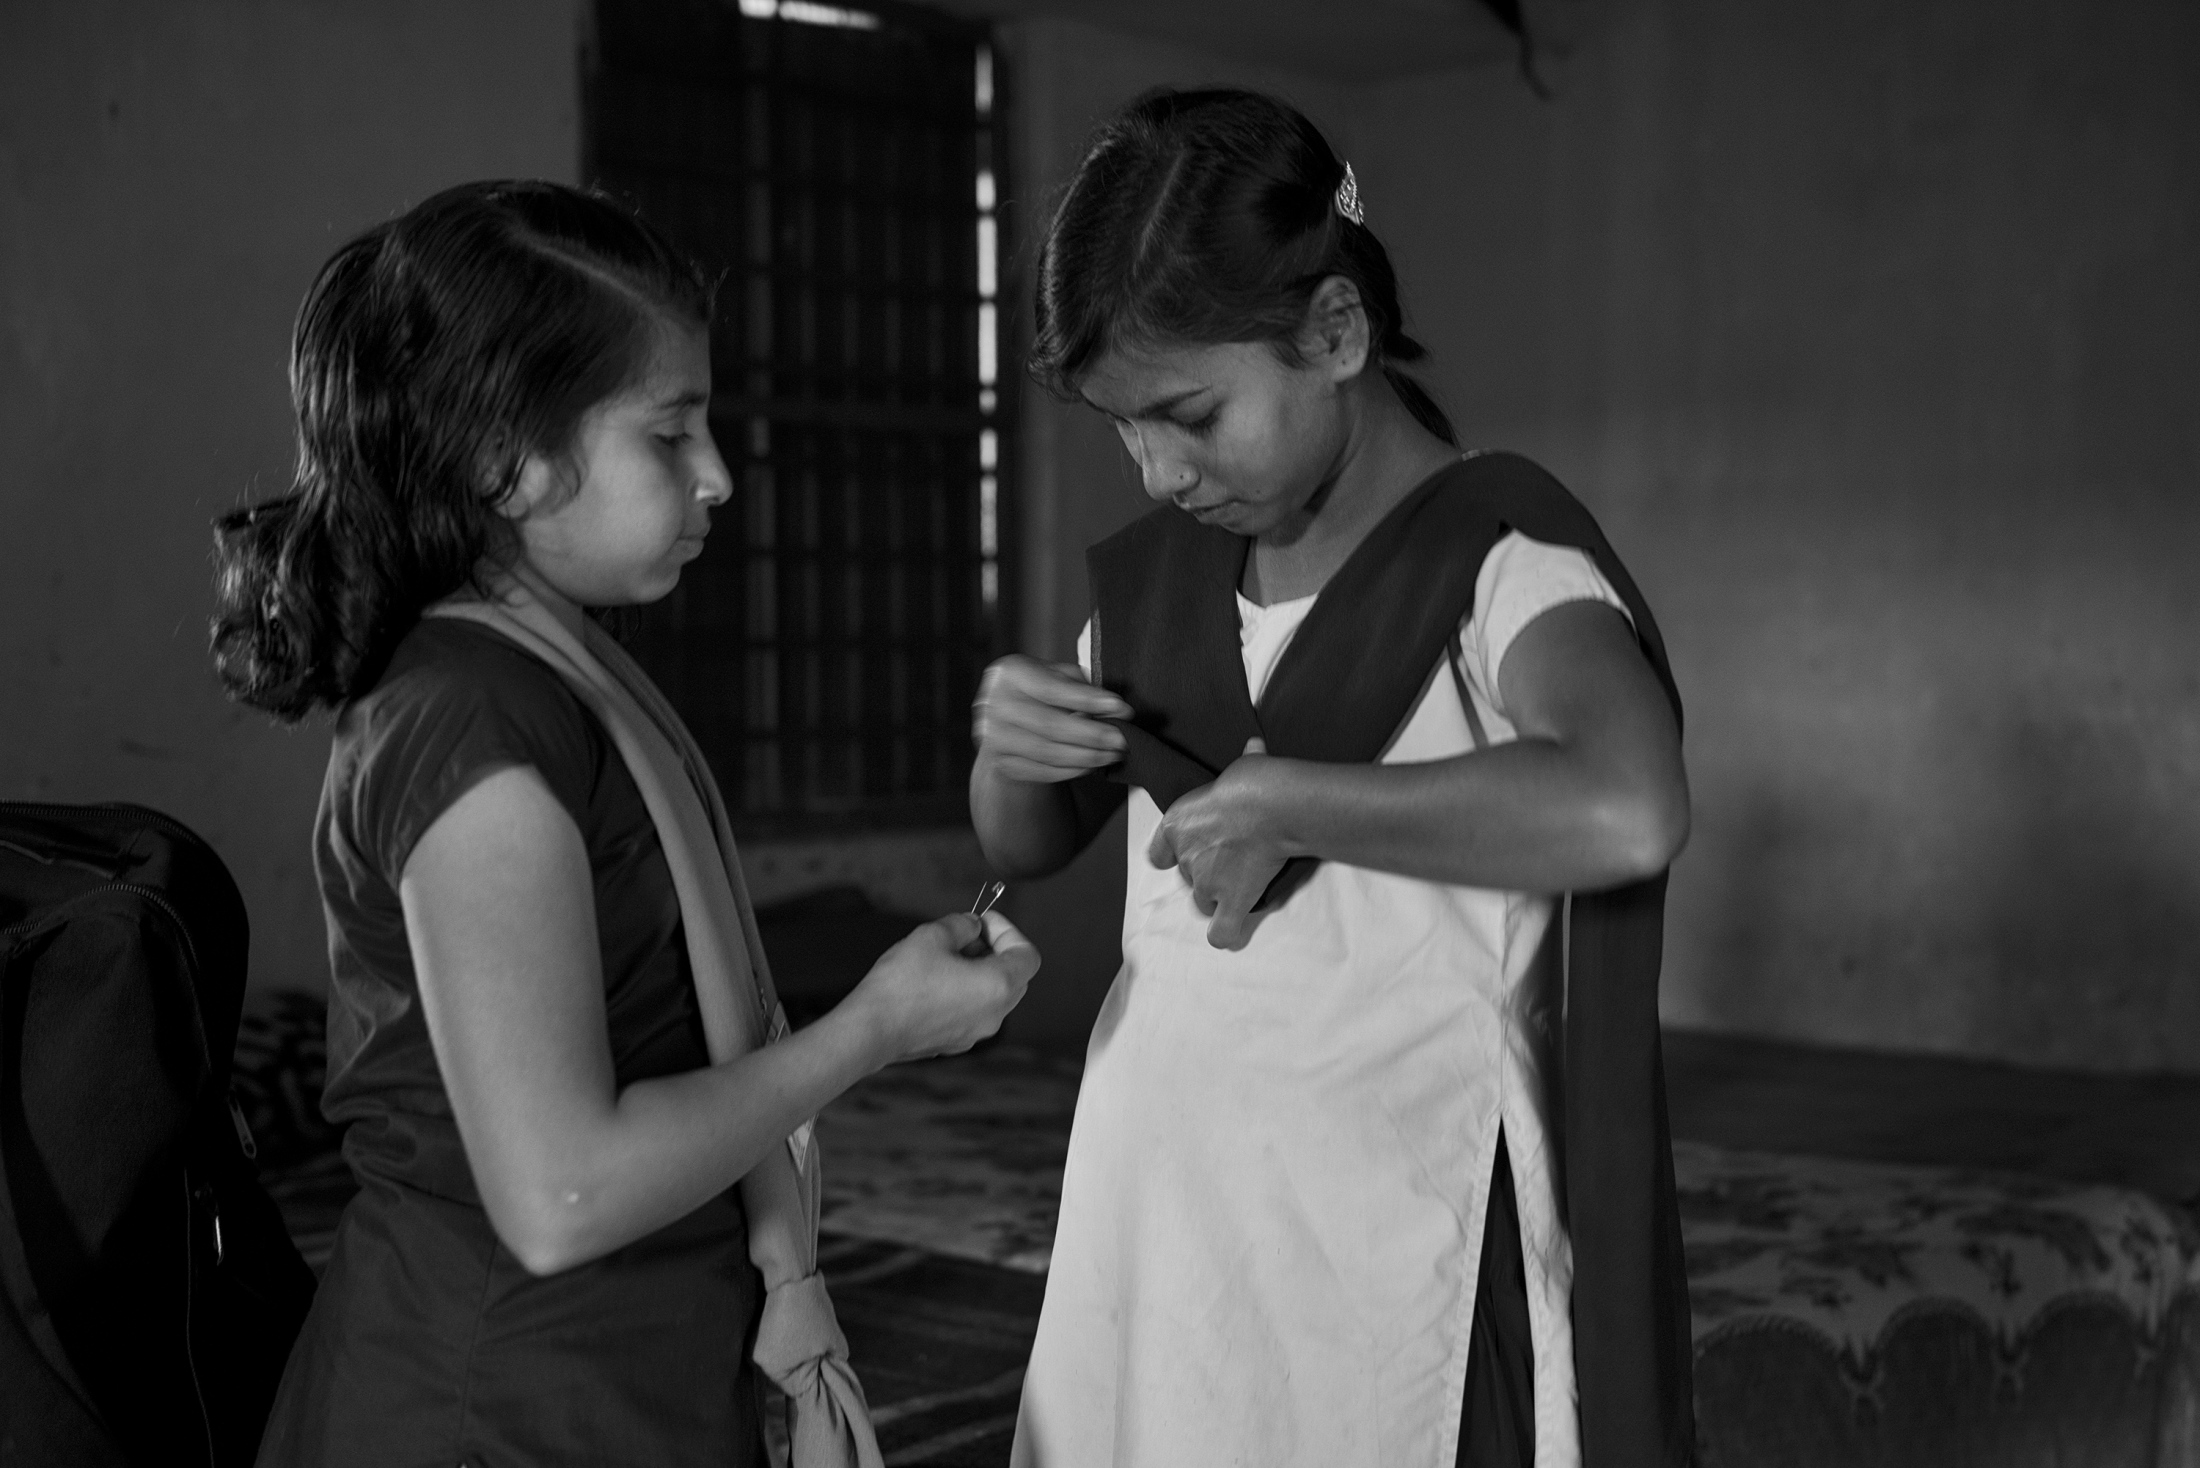 The Boarding School Saves Young Girls from Intergenerational Prostitution - Bihar, India -  Some girls play inside the room, they break caste...